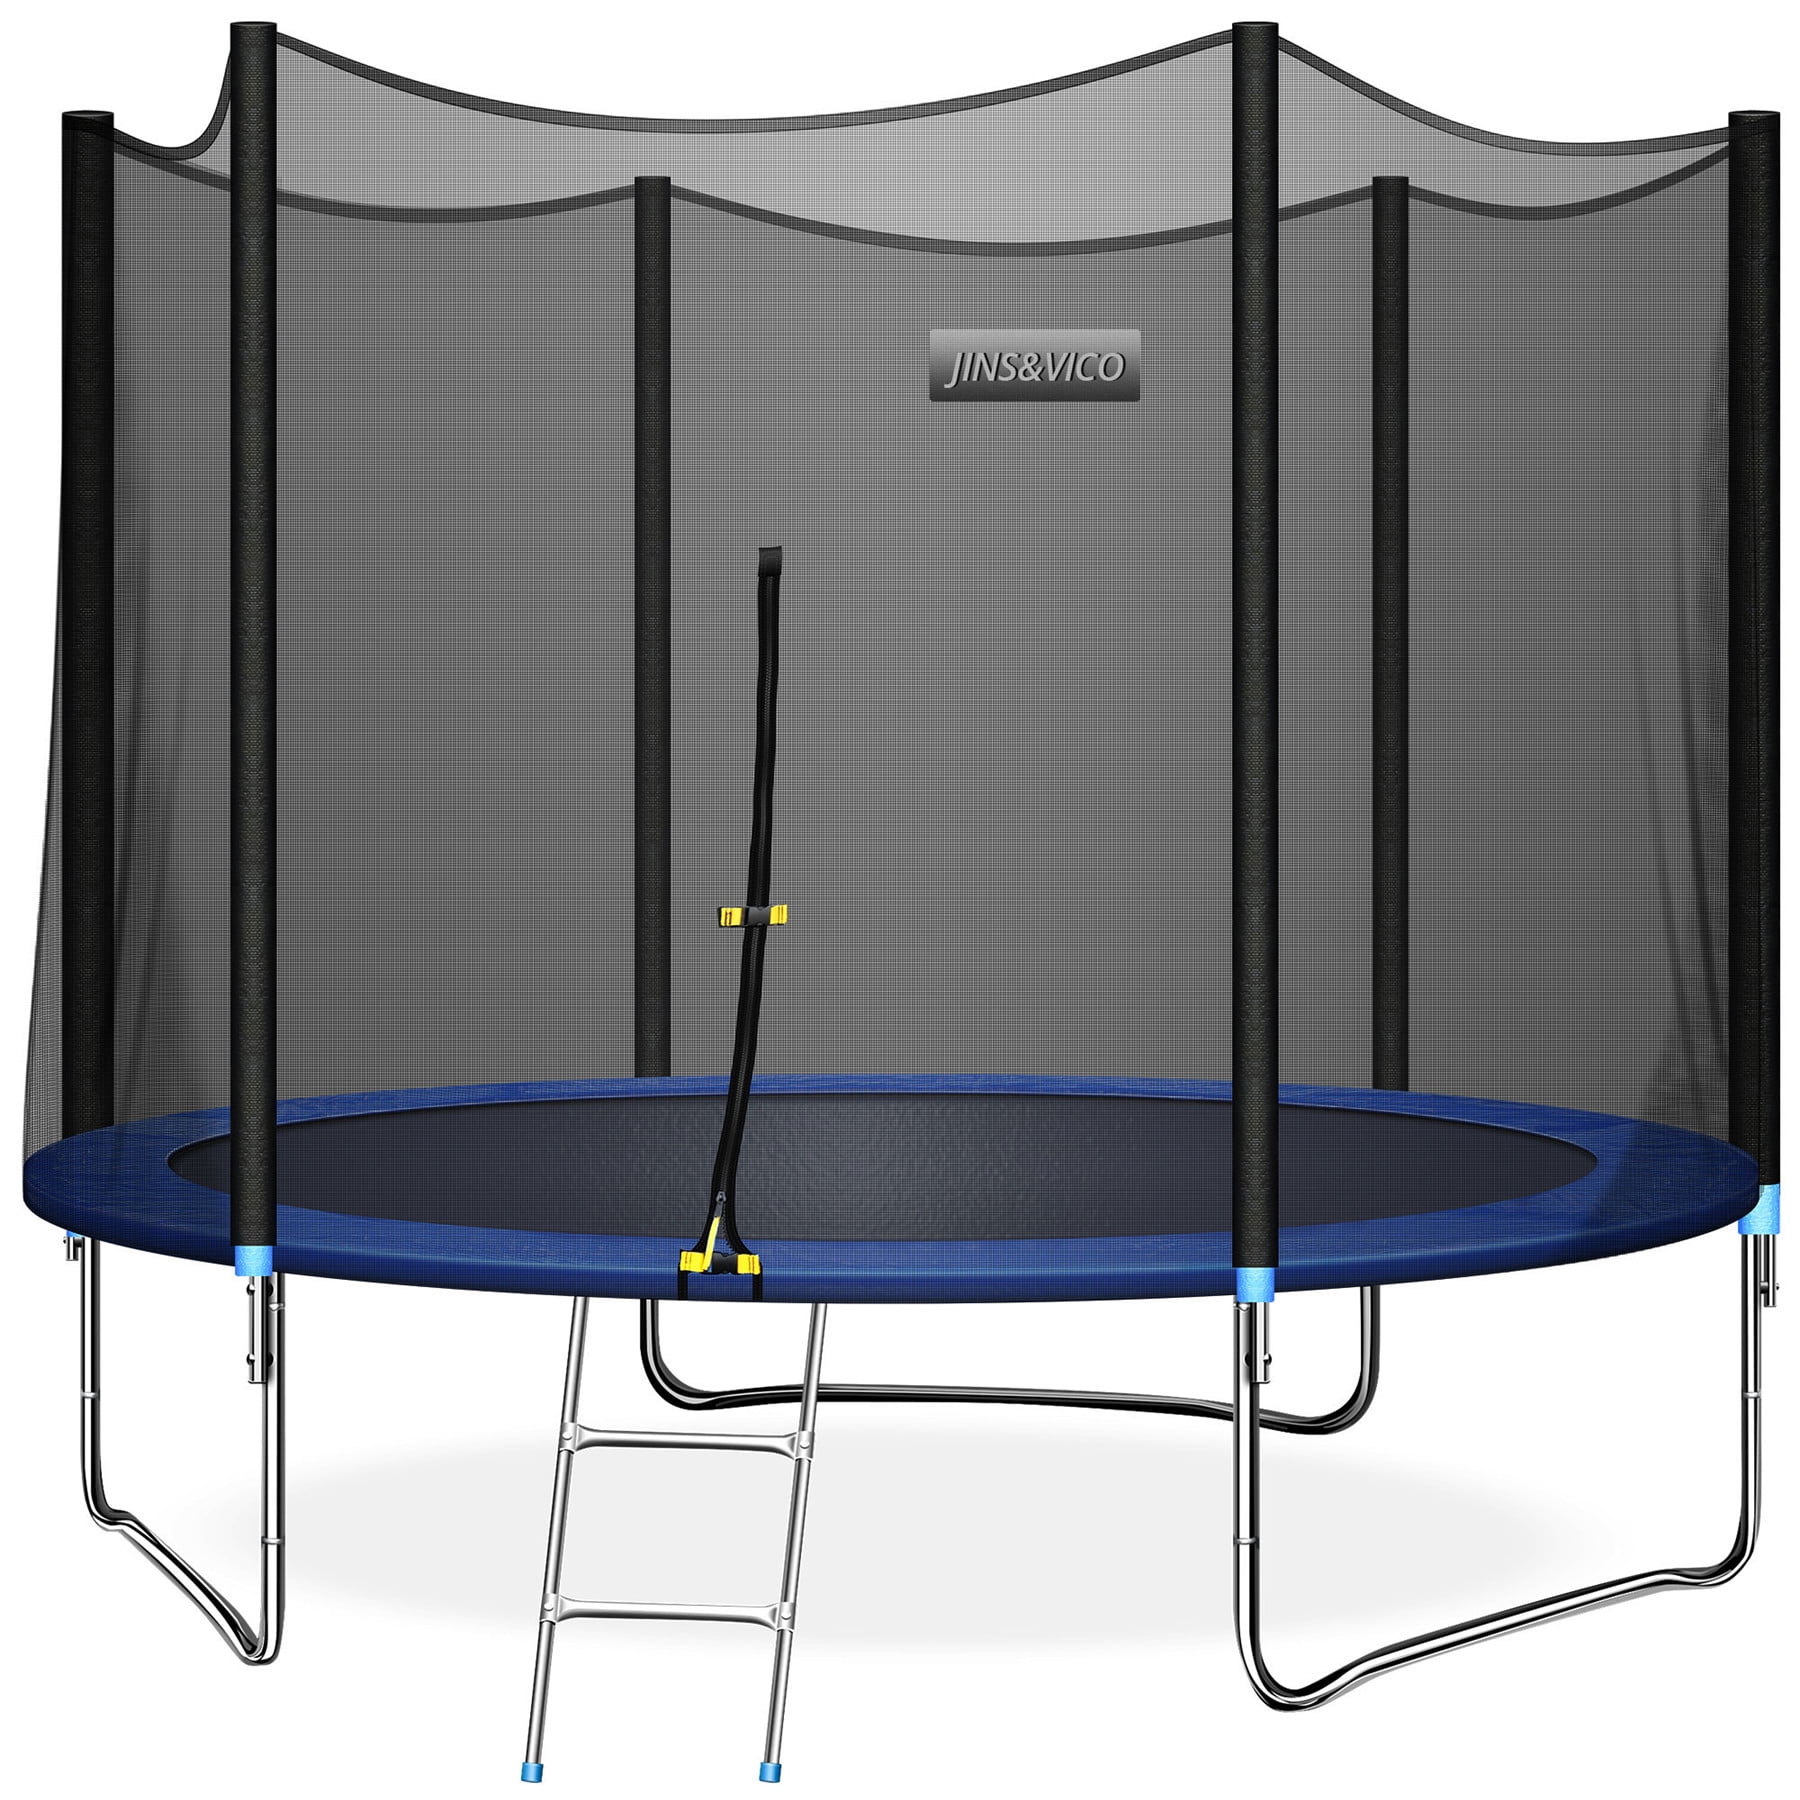 Details about   5/12FT Trampoline Combo Bounce Jump Safety Enclosure Net w/Spring Pad Ladder 